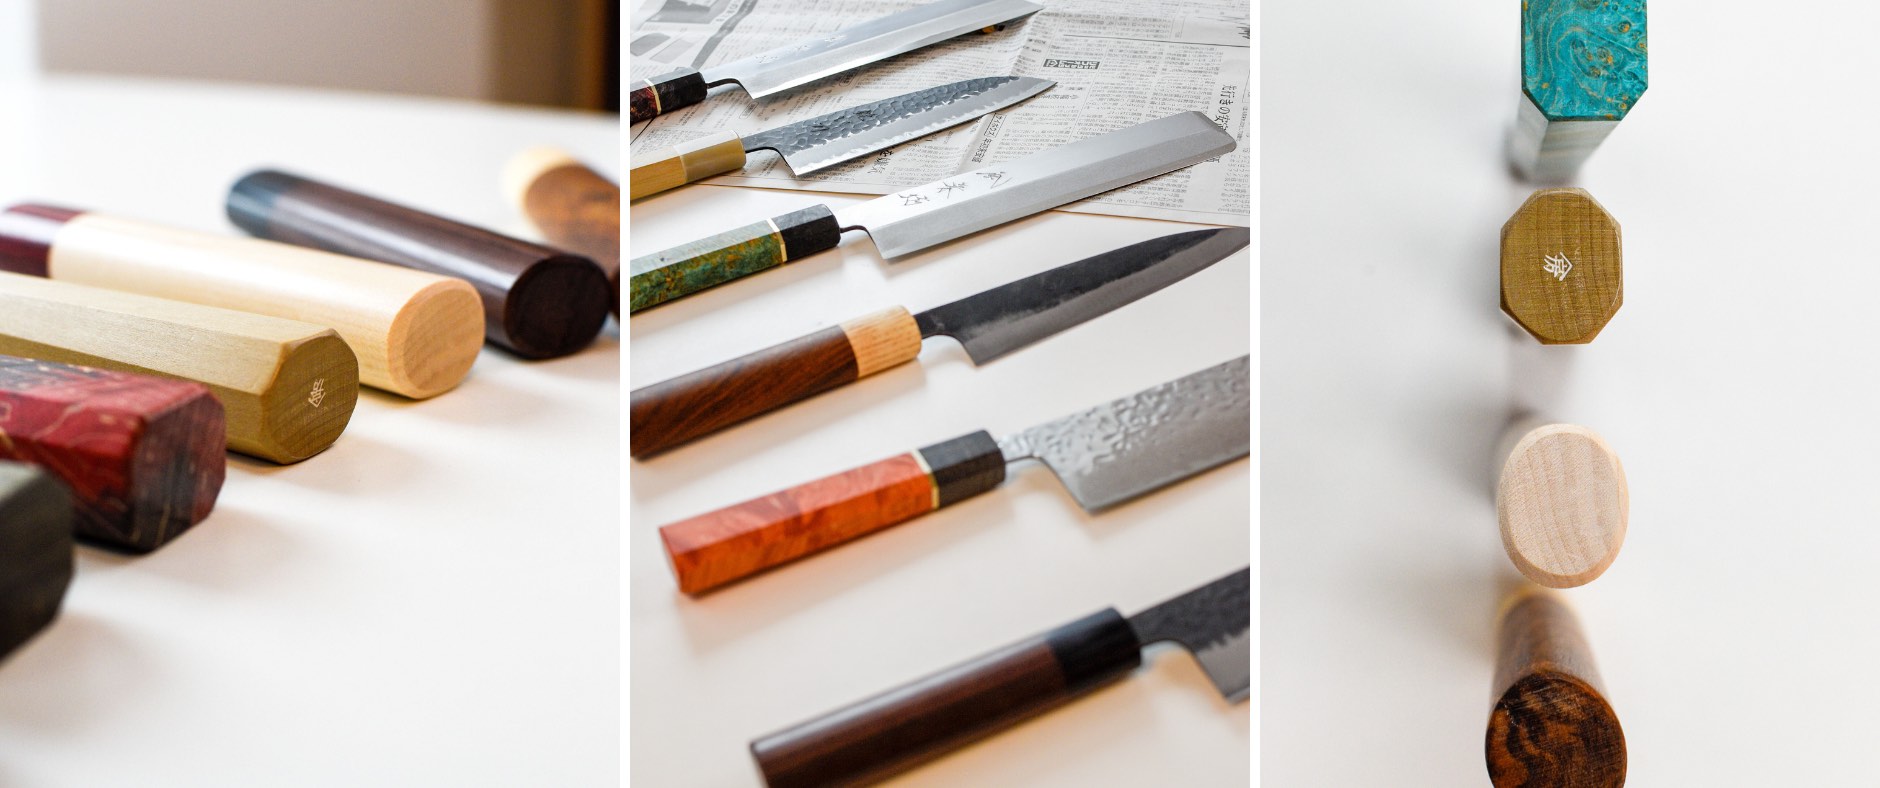 What's the Difference between German and Japanese Knives? - Gear